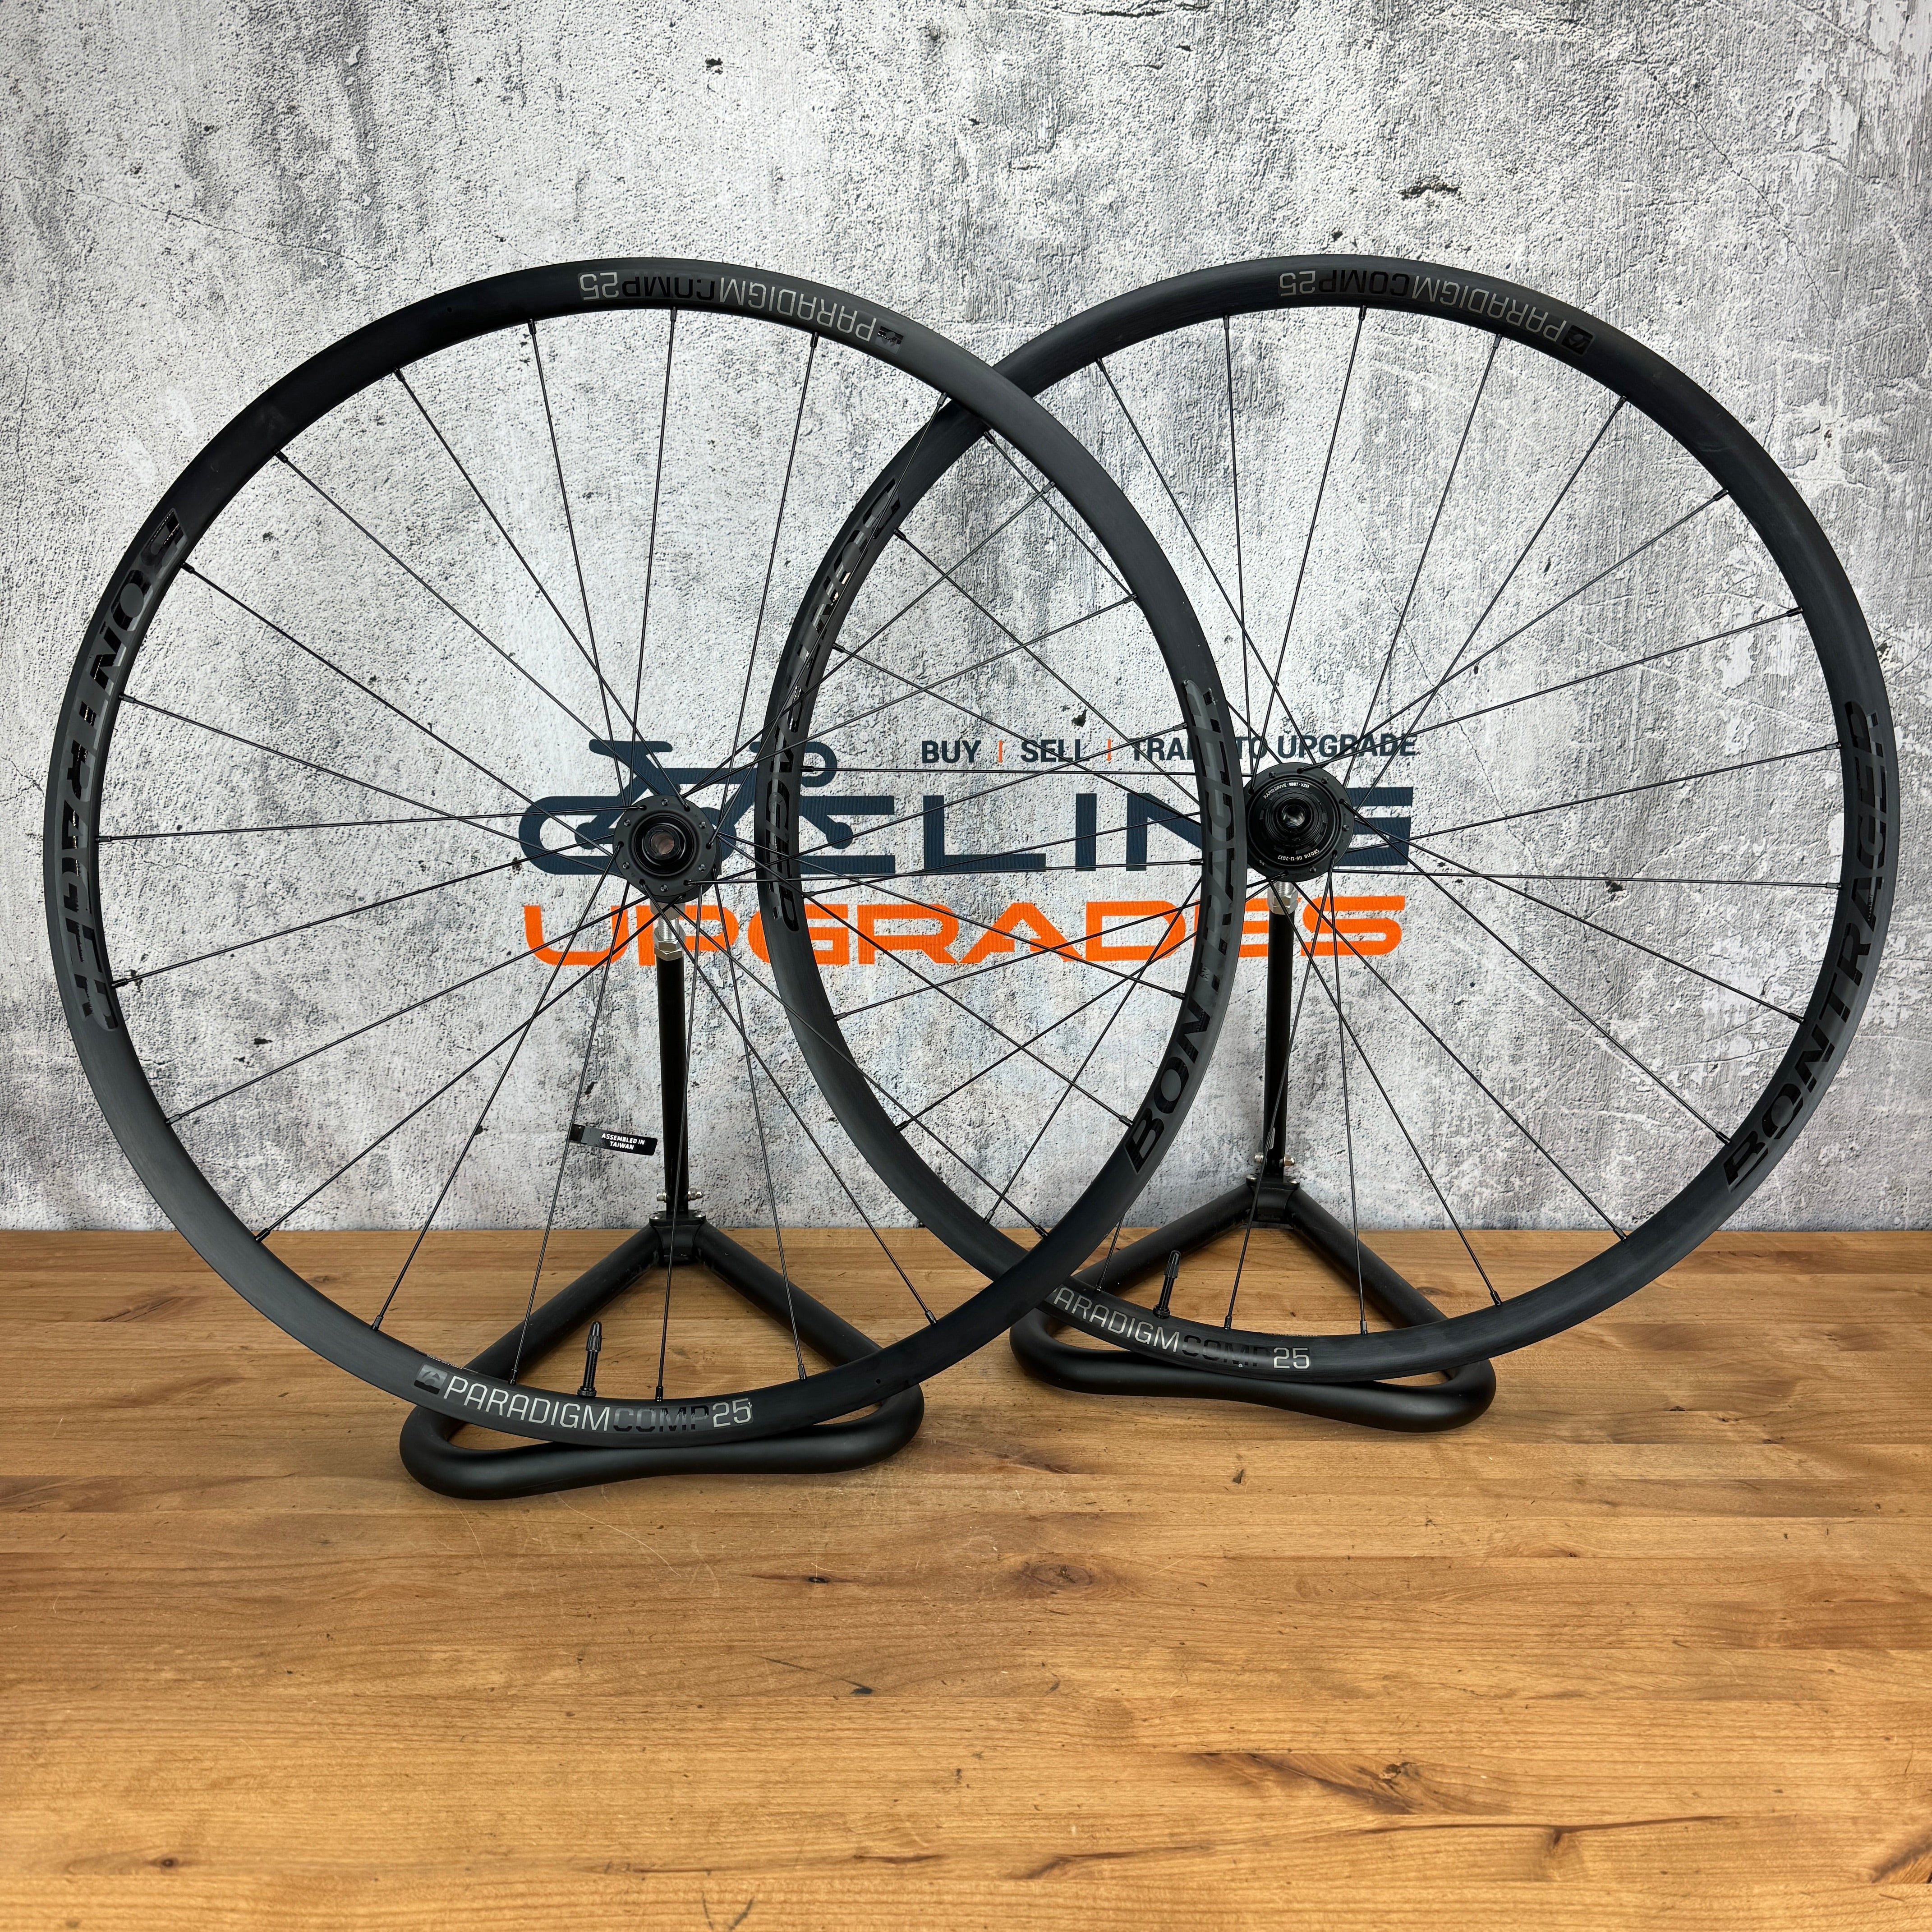 New Takeoff! Bontrager Paradigm Comp 25 TLR Alloy Tubeless Disc